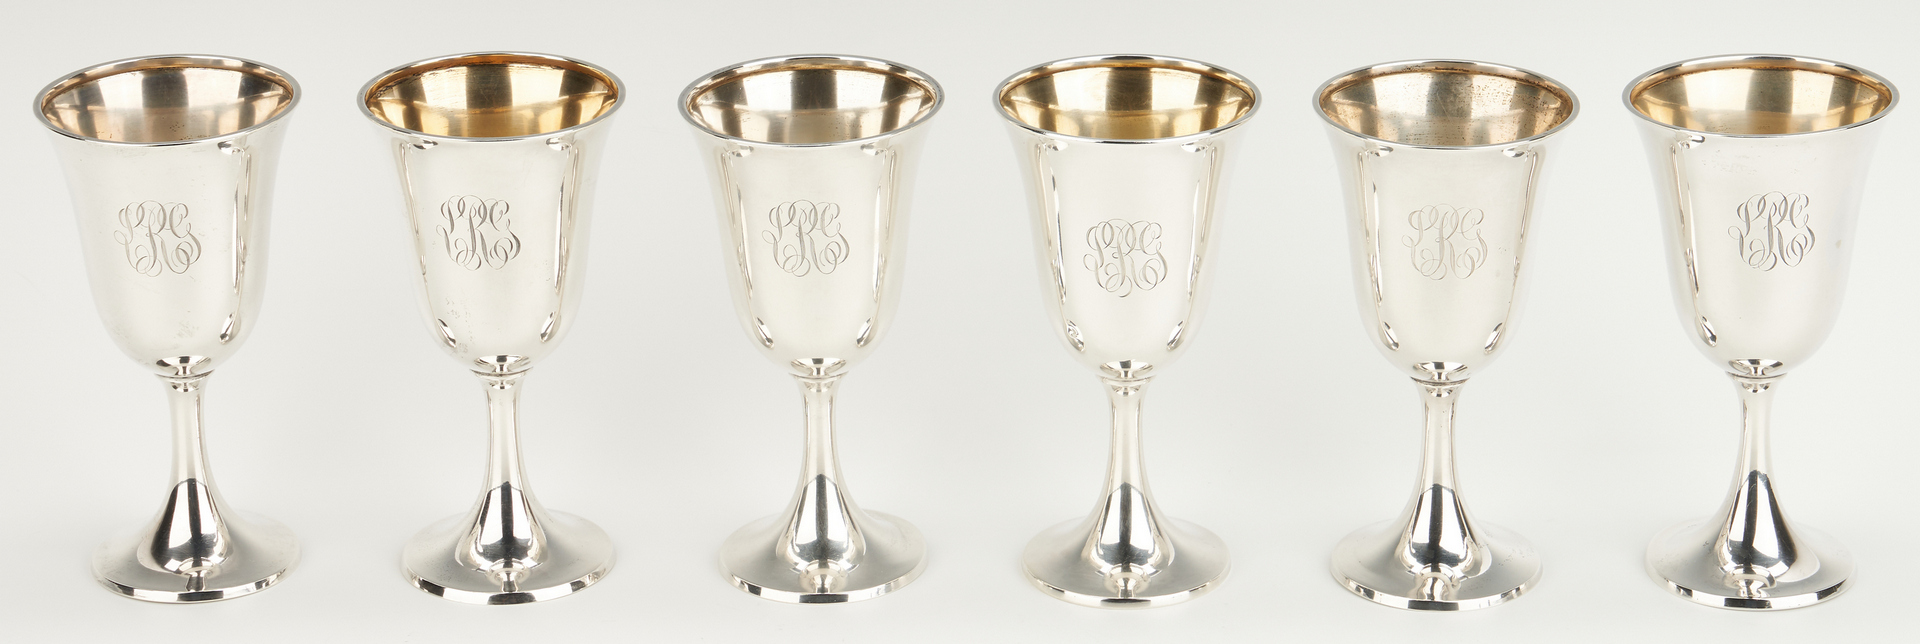 Lot 235: 12 Wallace Sterling Silver Goblets